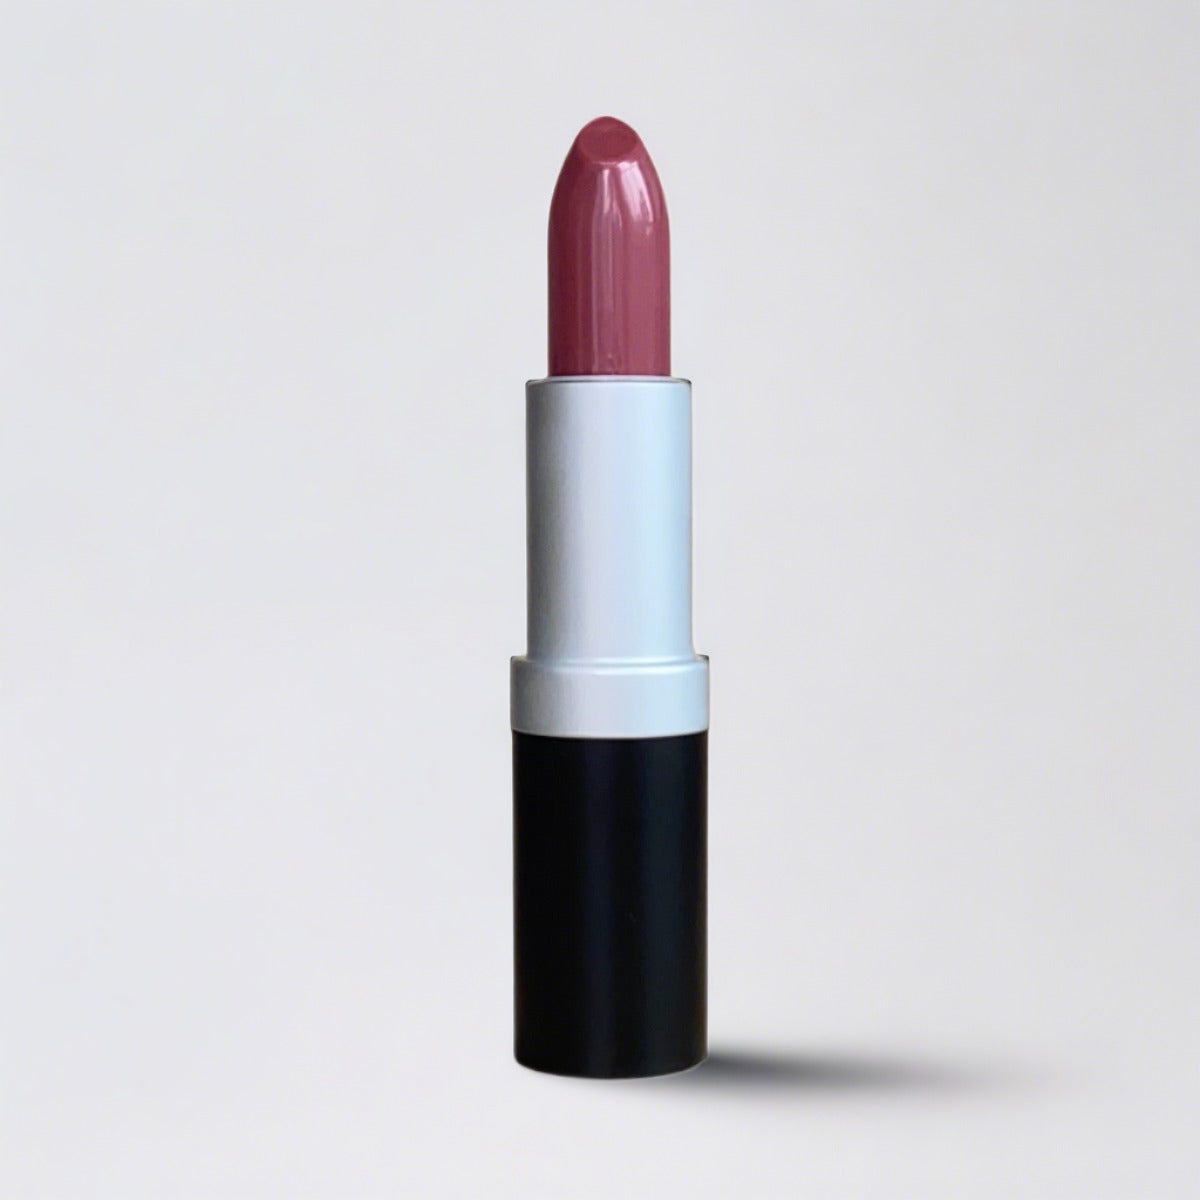 Conch Lipstick  lip shade to pink your lips naturally